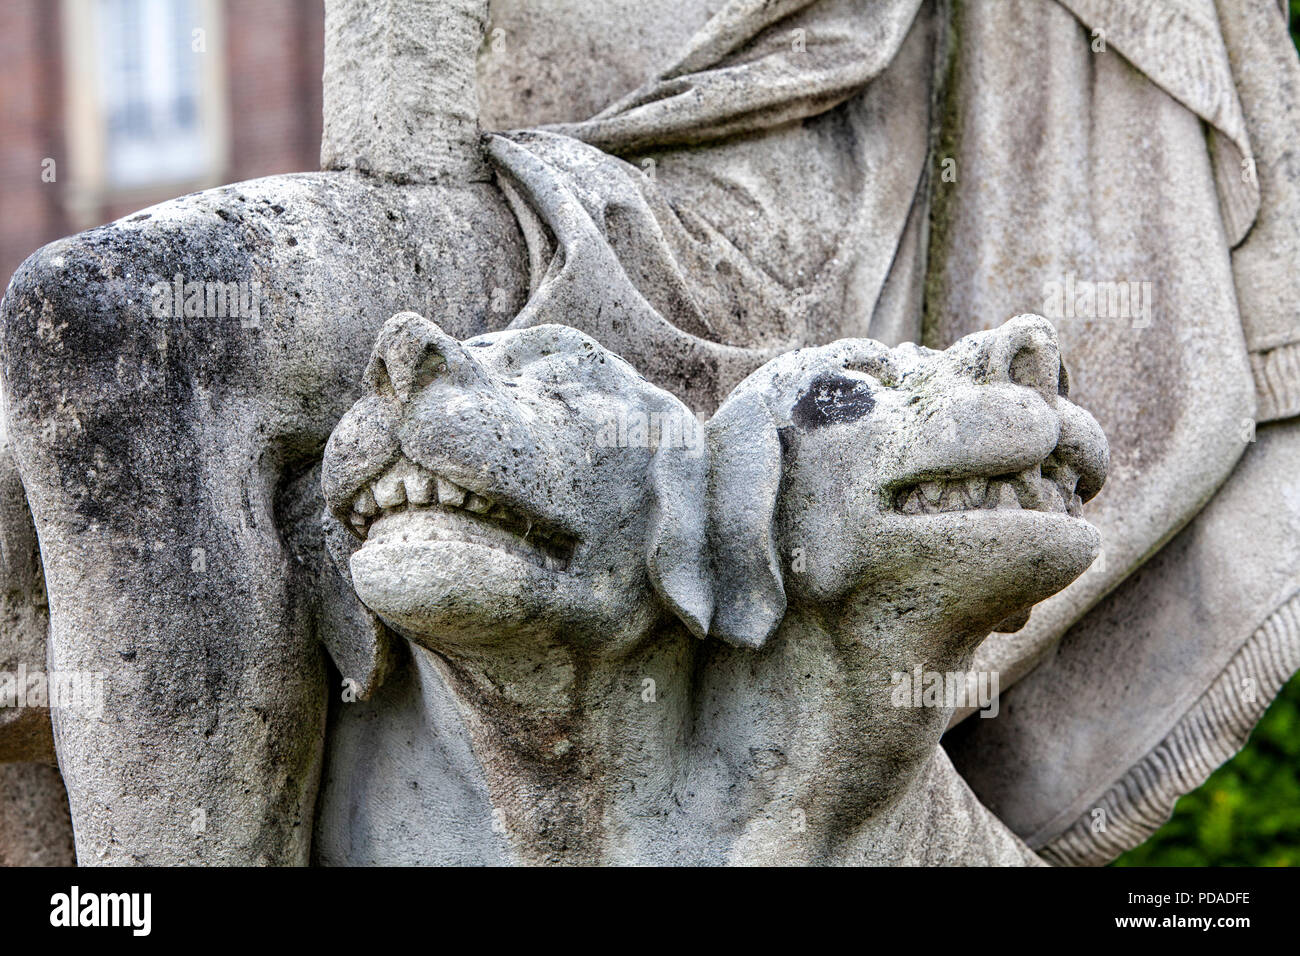 Statue of Cerberus at Nordkirchen Moated Palace, Germany Stock Photo